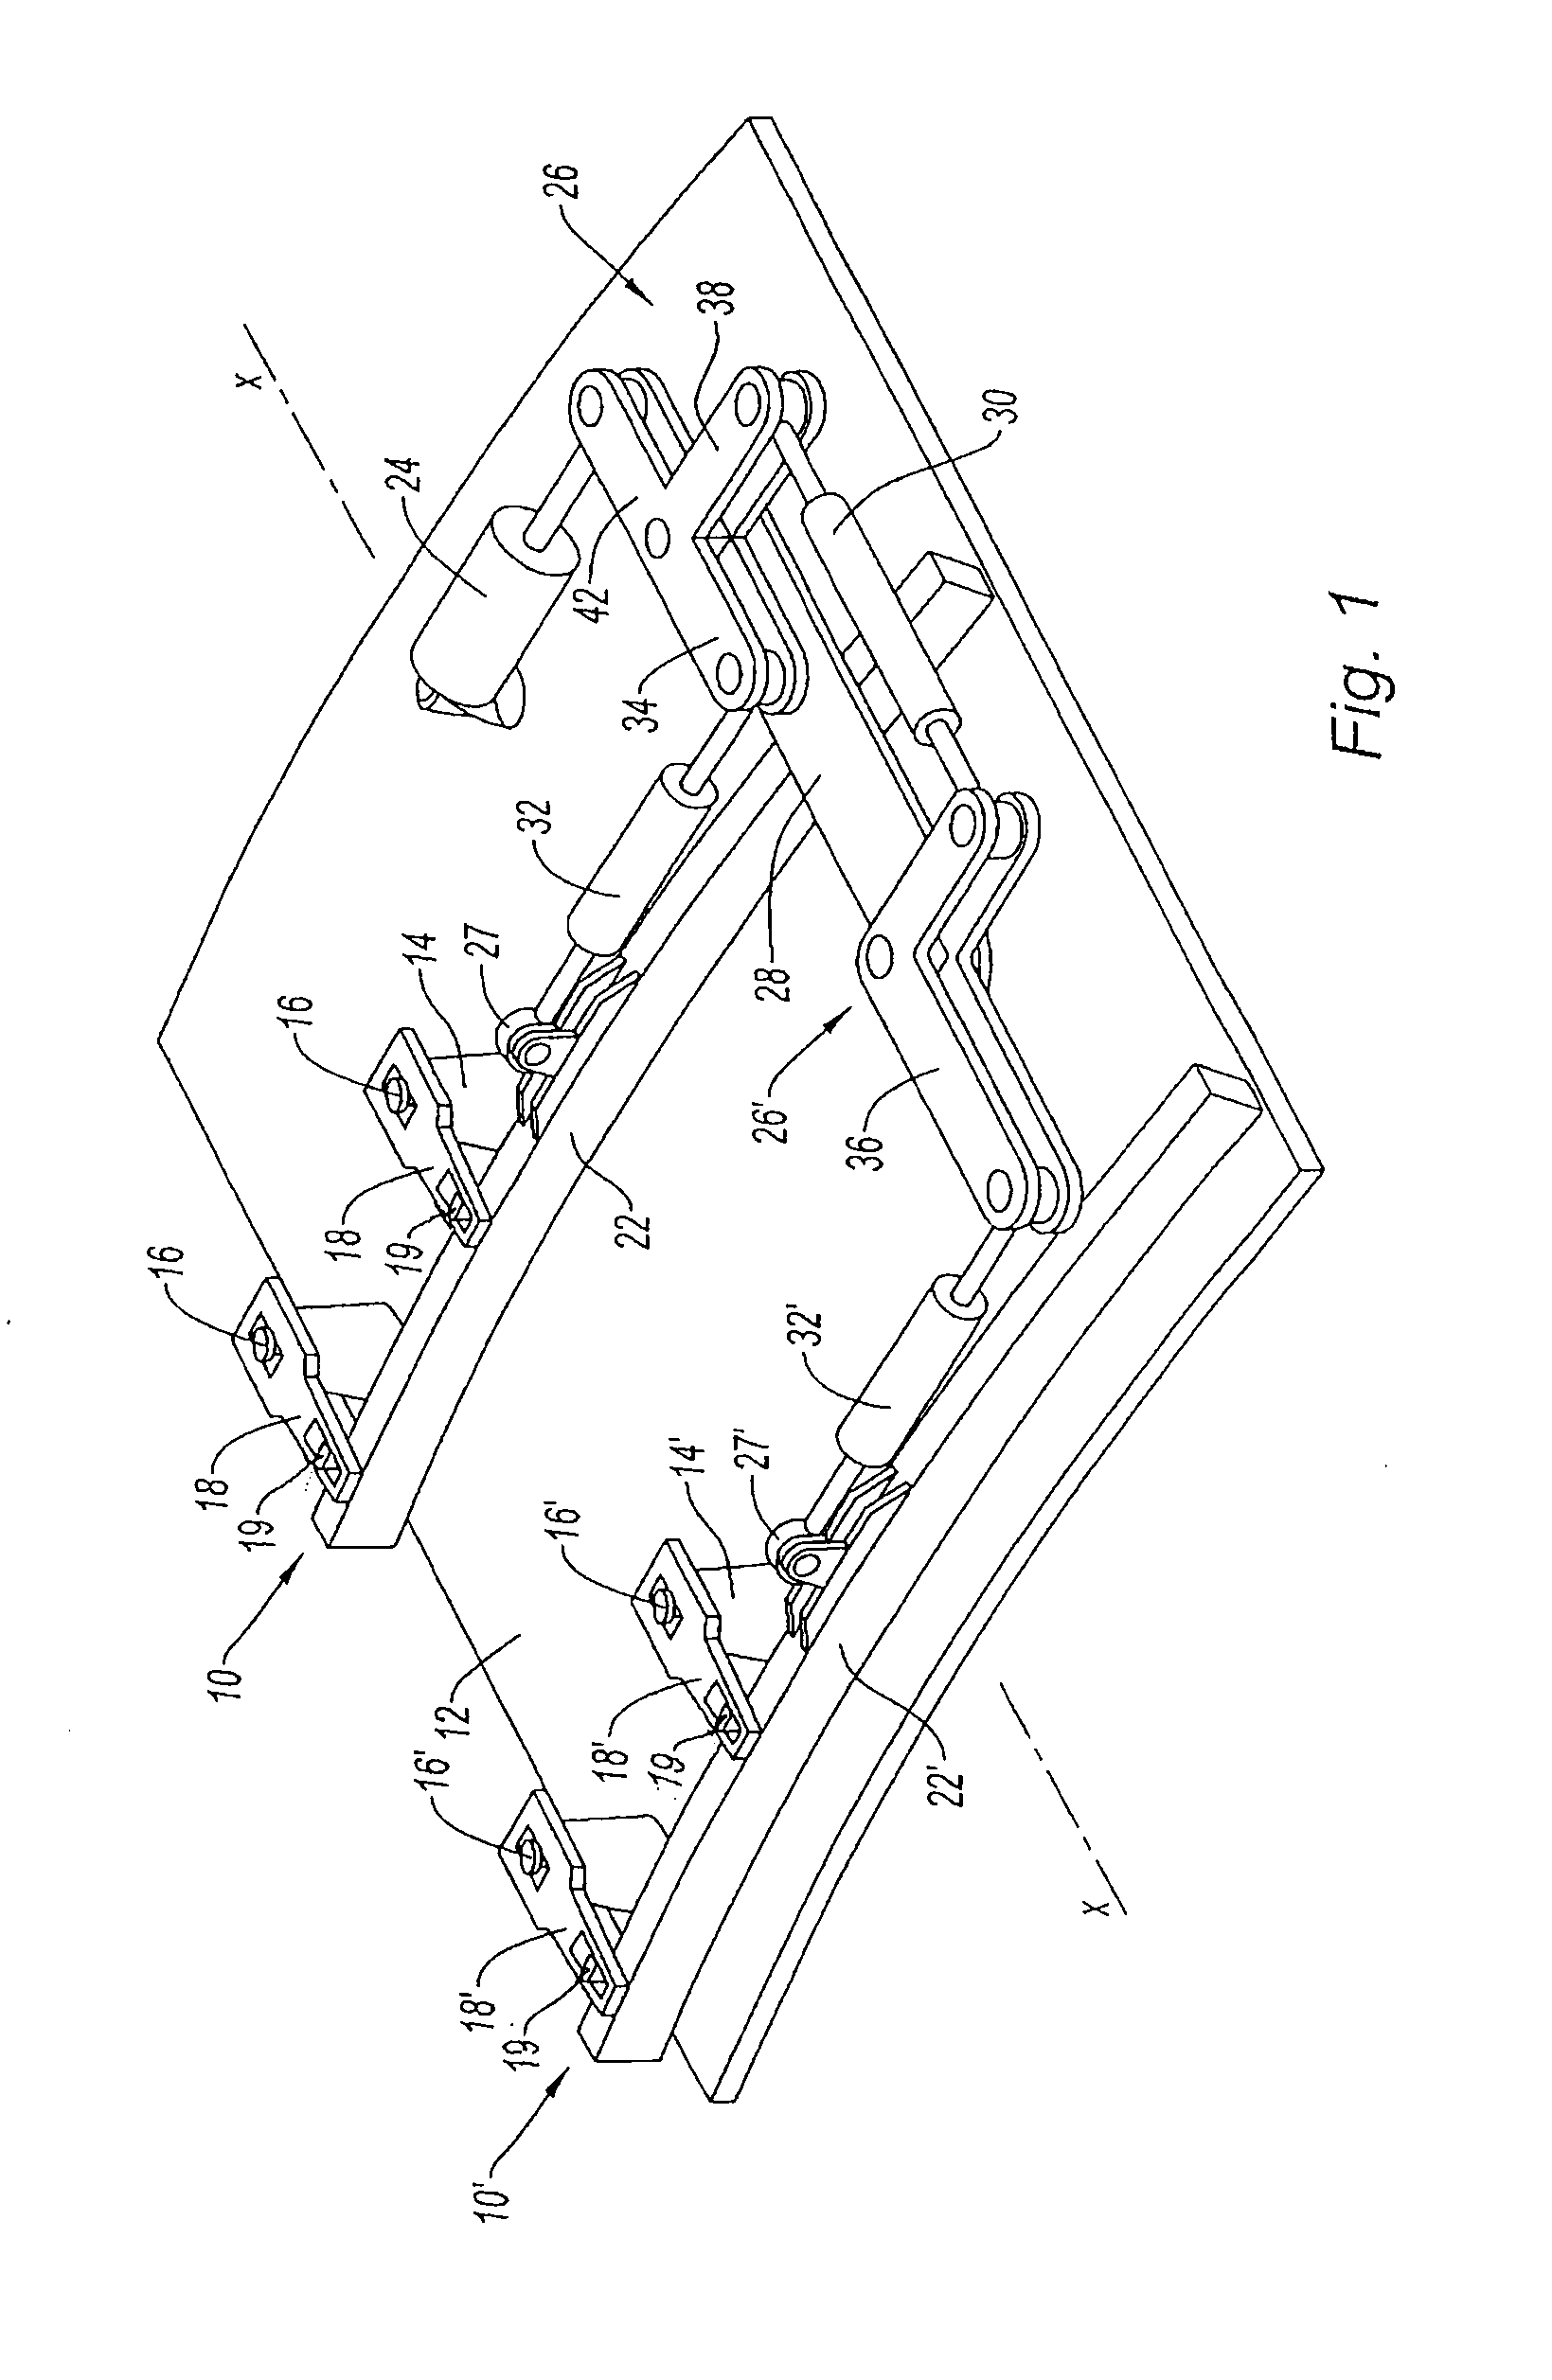 System for controlling variable-geometry equipments of a turbomachine, particularly by articulated bellcranks